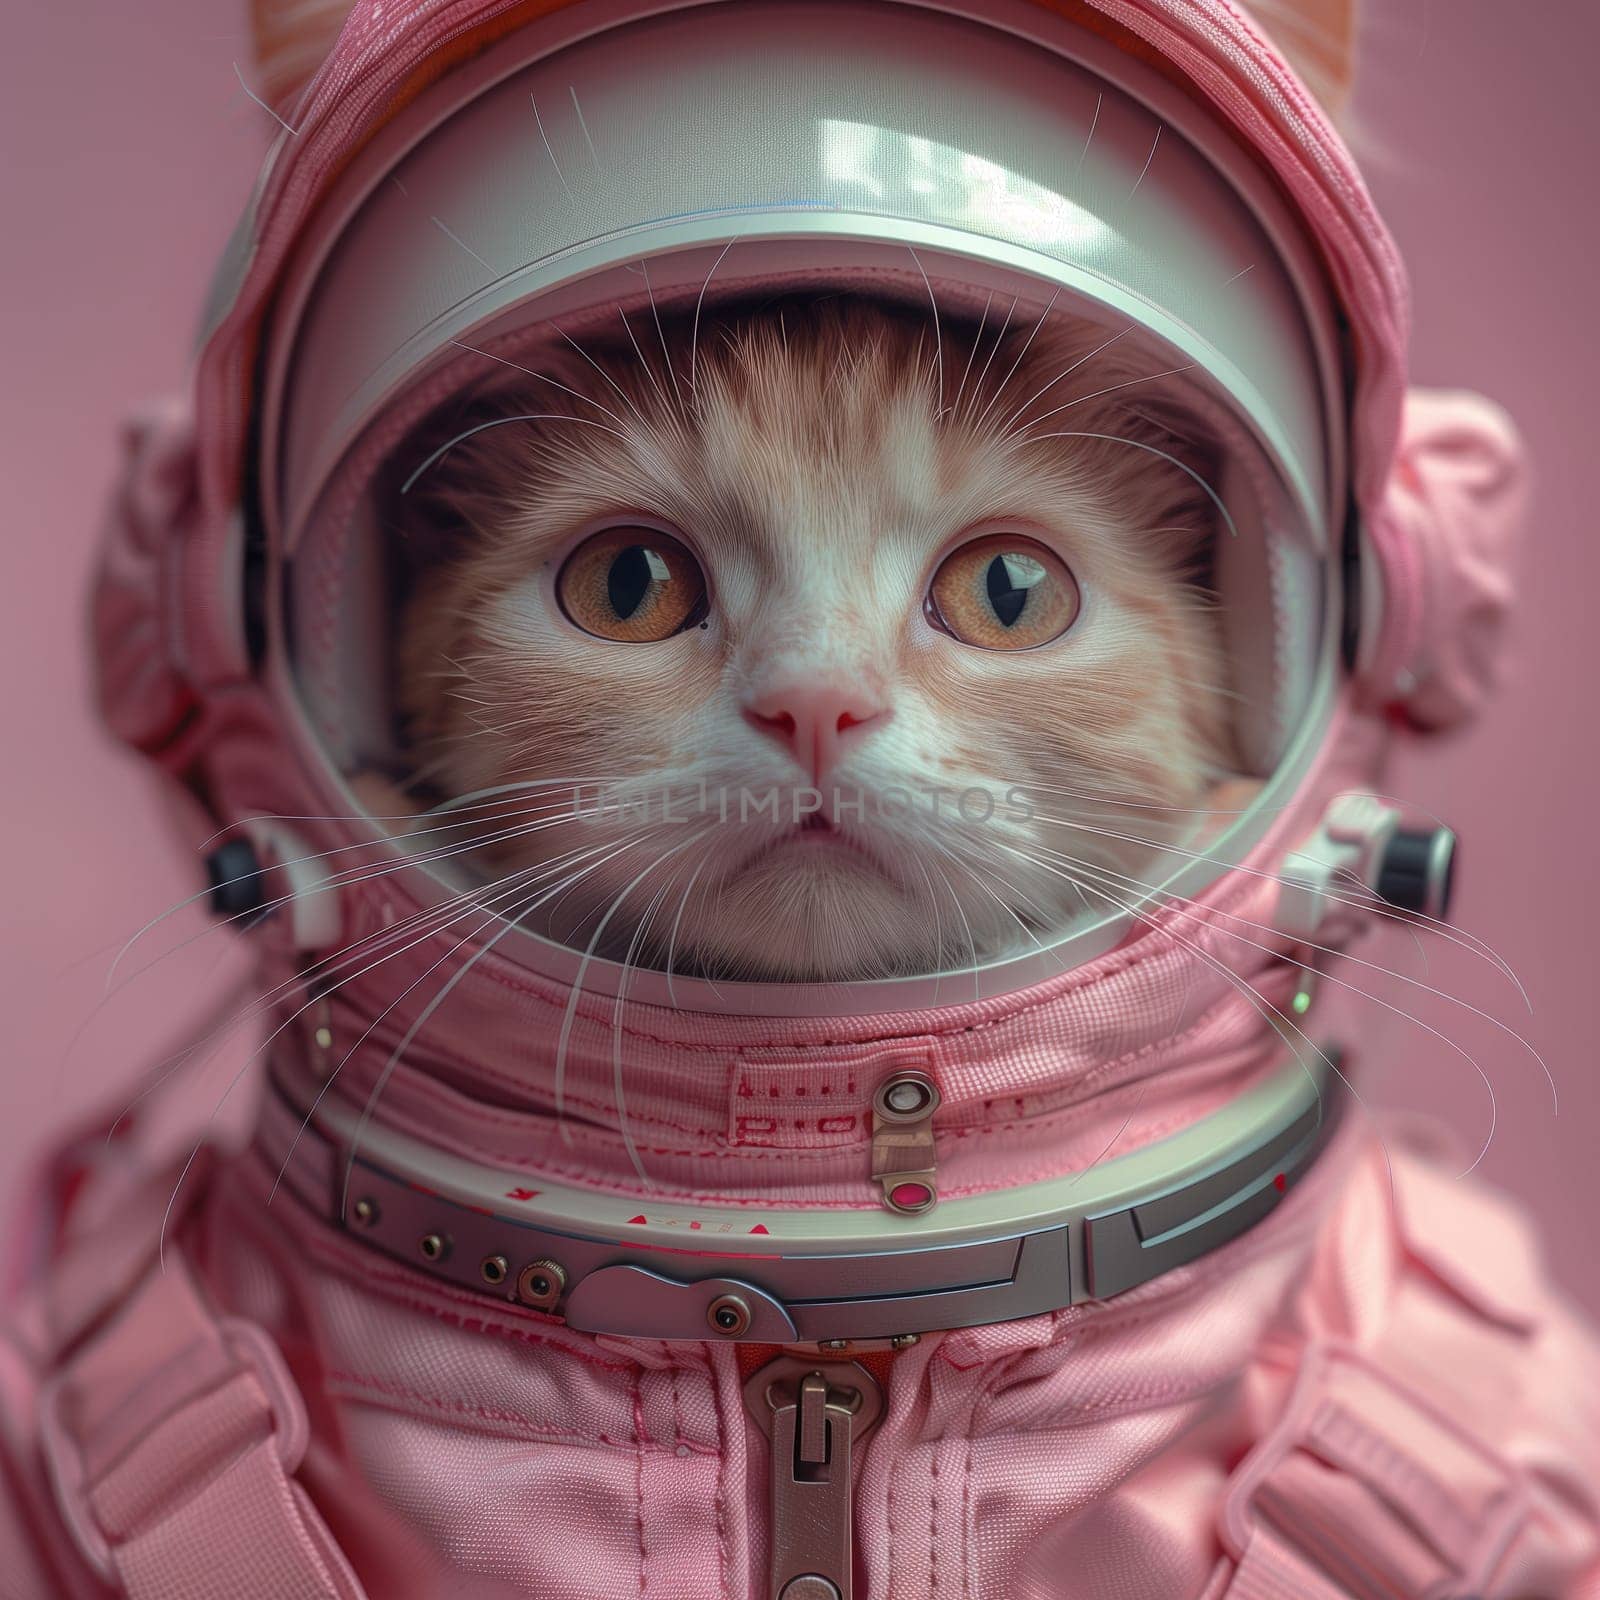 A Felidae, with whiskers, pink eye iris, and snout, is wearing a pink space suit and helmet with sleeve for protection